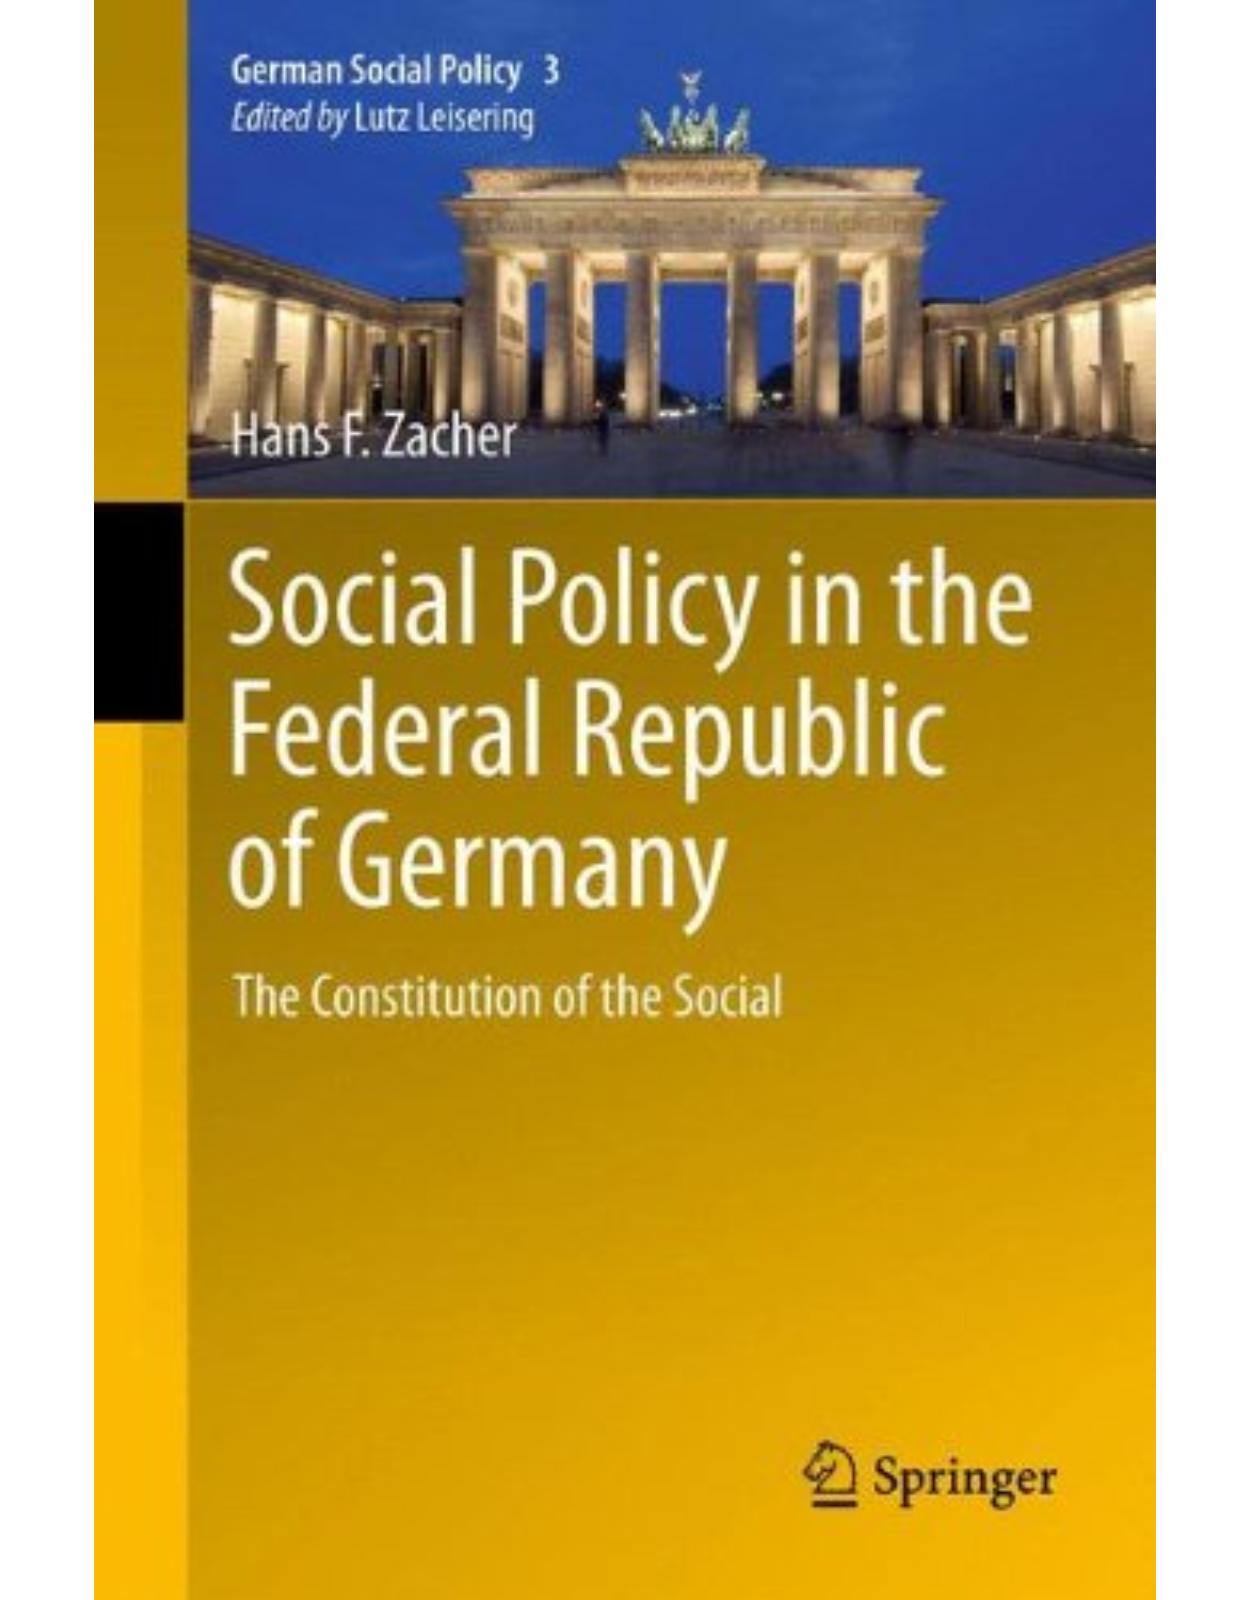 Social Policy in the Federal Republic of Germany: The Constitution of the Social (German Social Policy) 